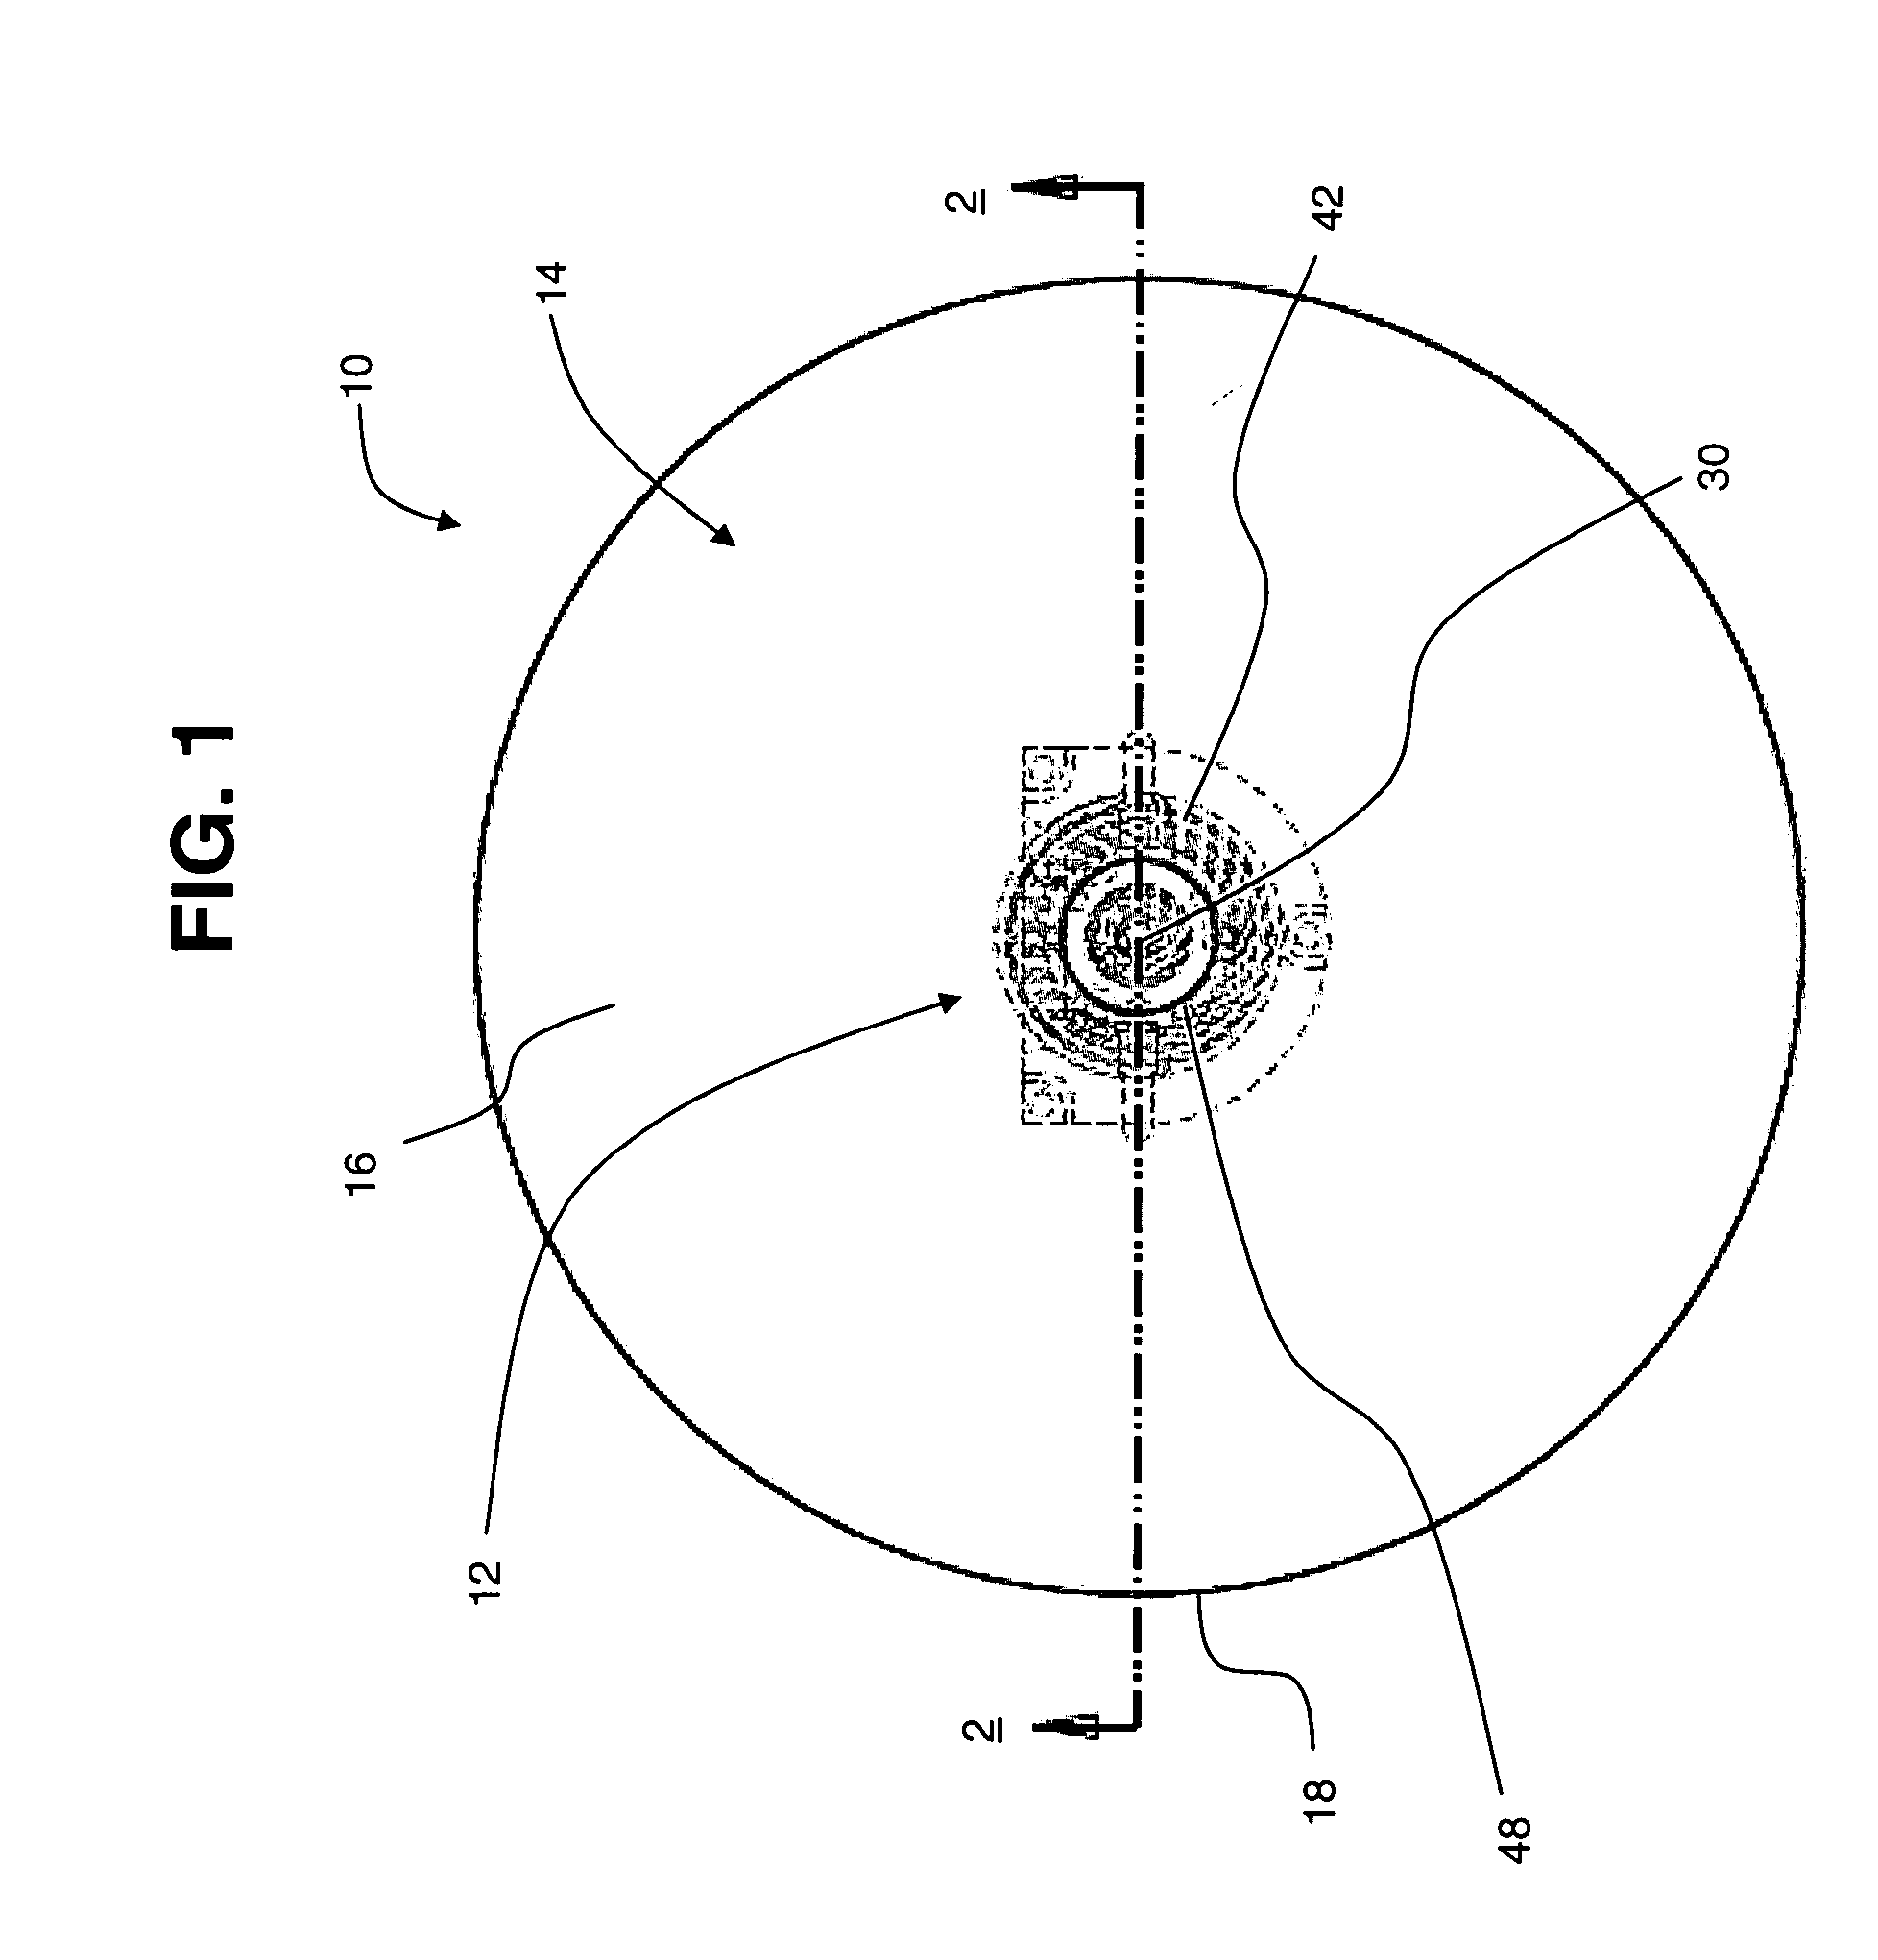 Stabilizing holographic disk medium against vibrations and/or controlling deflection of disk medium